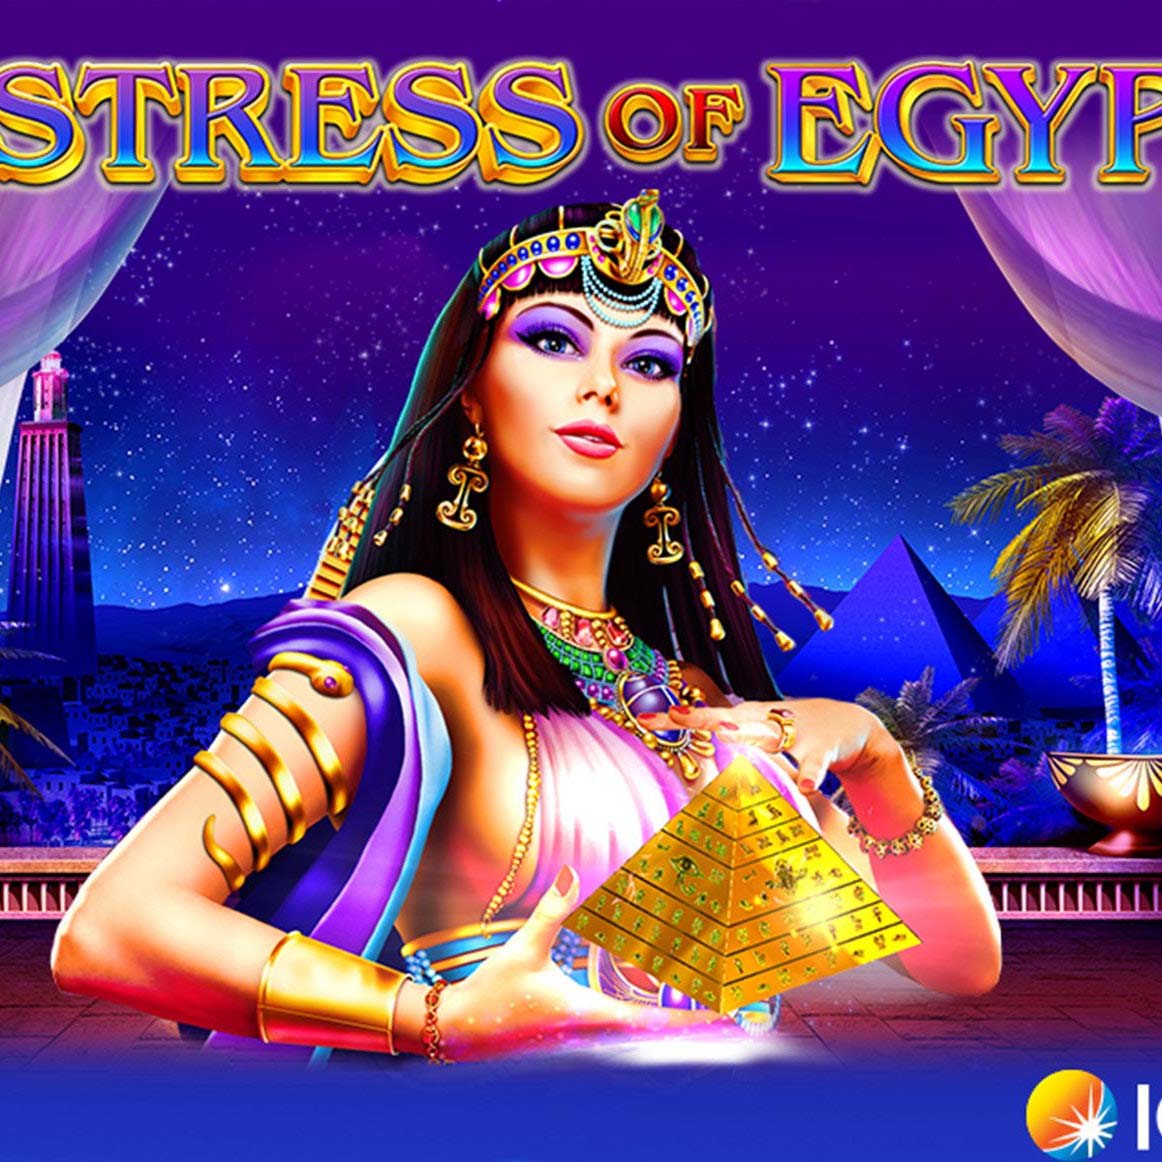 Screenshot of the Mistress of Egypt slot by IGT